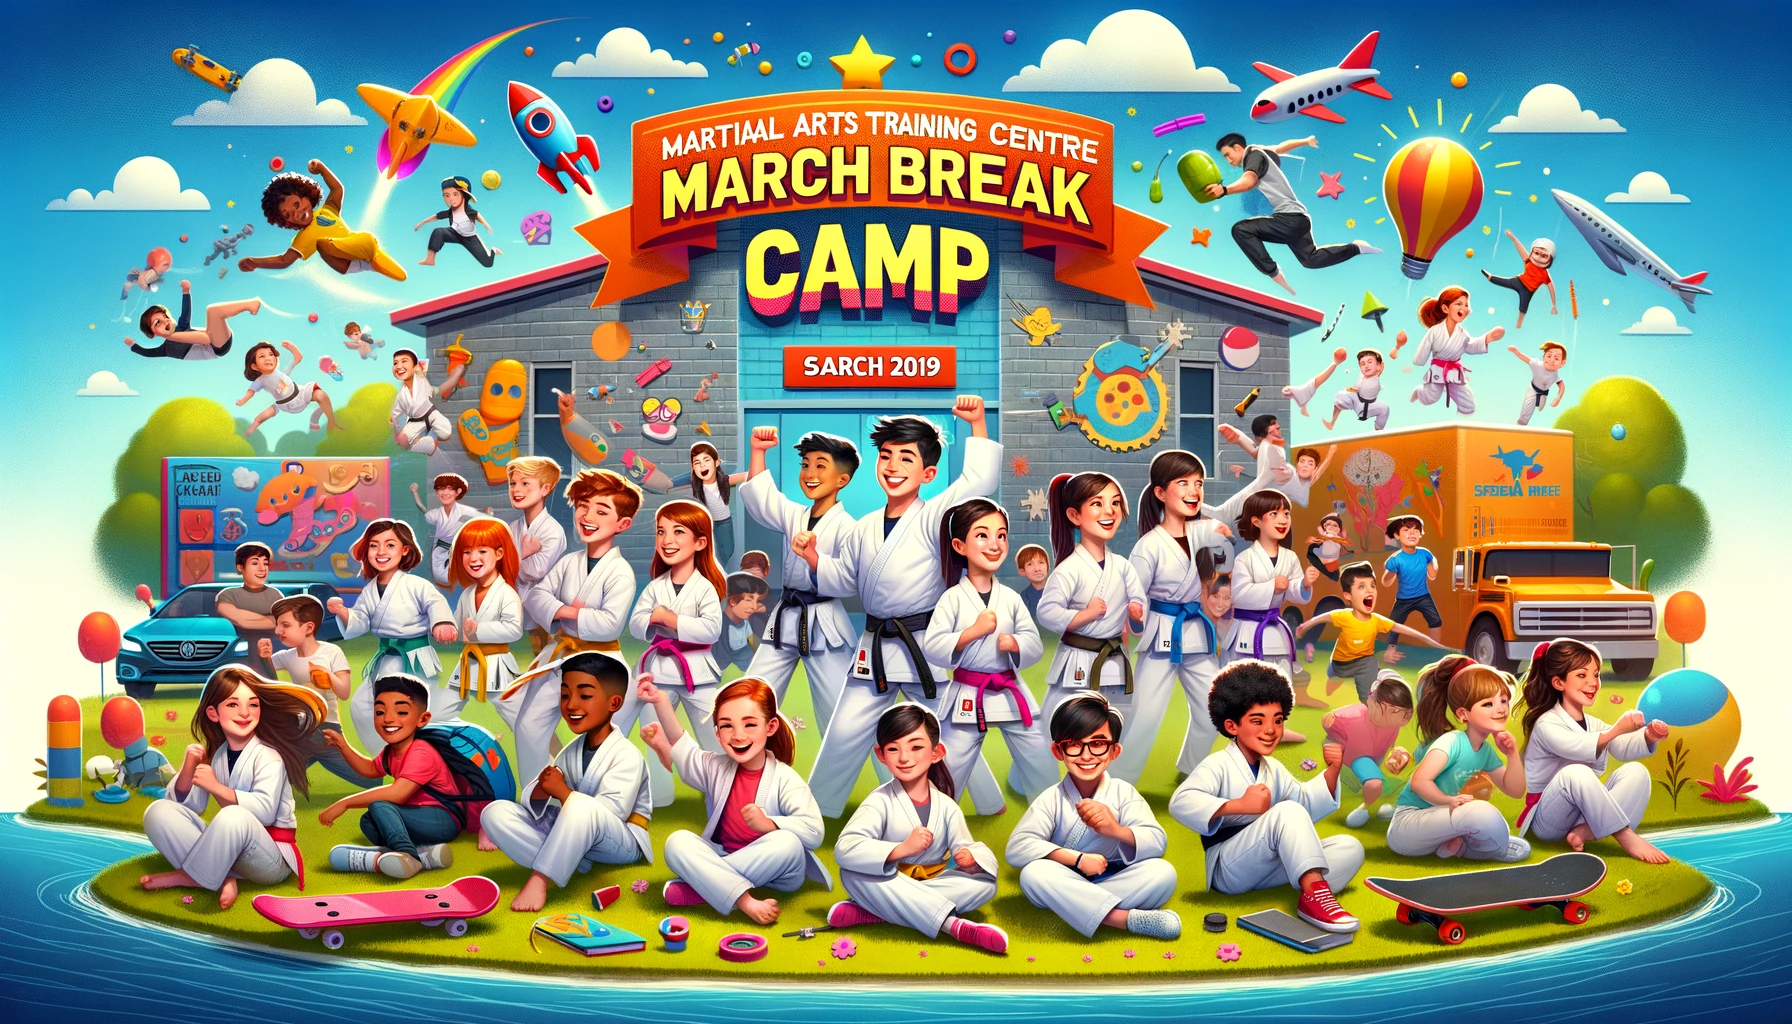 A vibrant and engaging background banner for a martial arts training centre's website, advertising a March Break Camp. The image should feature a dive